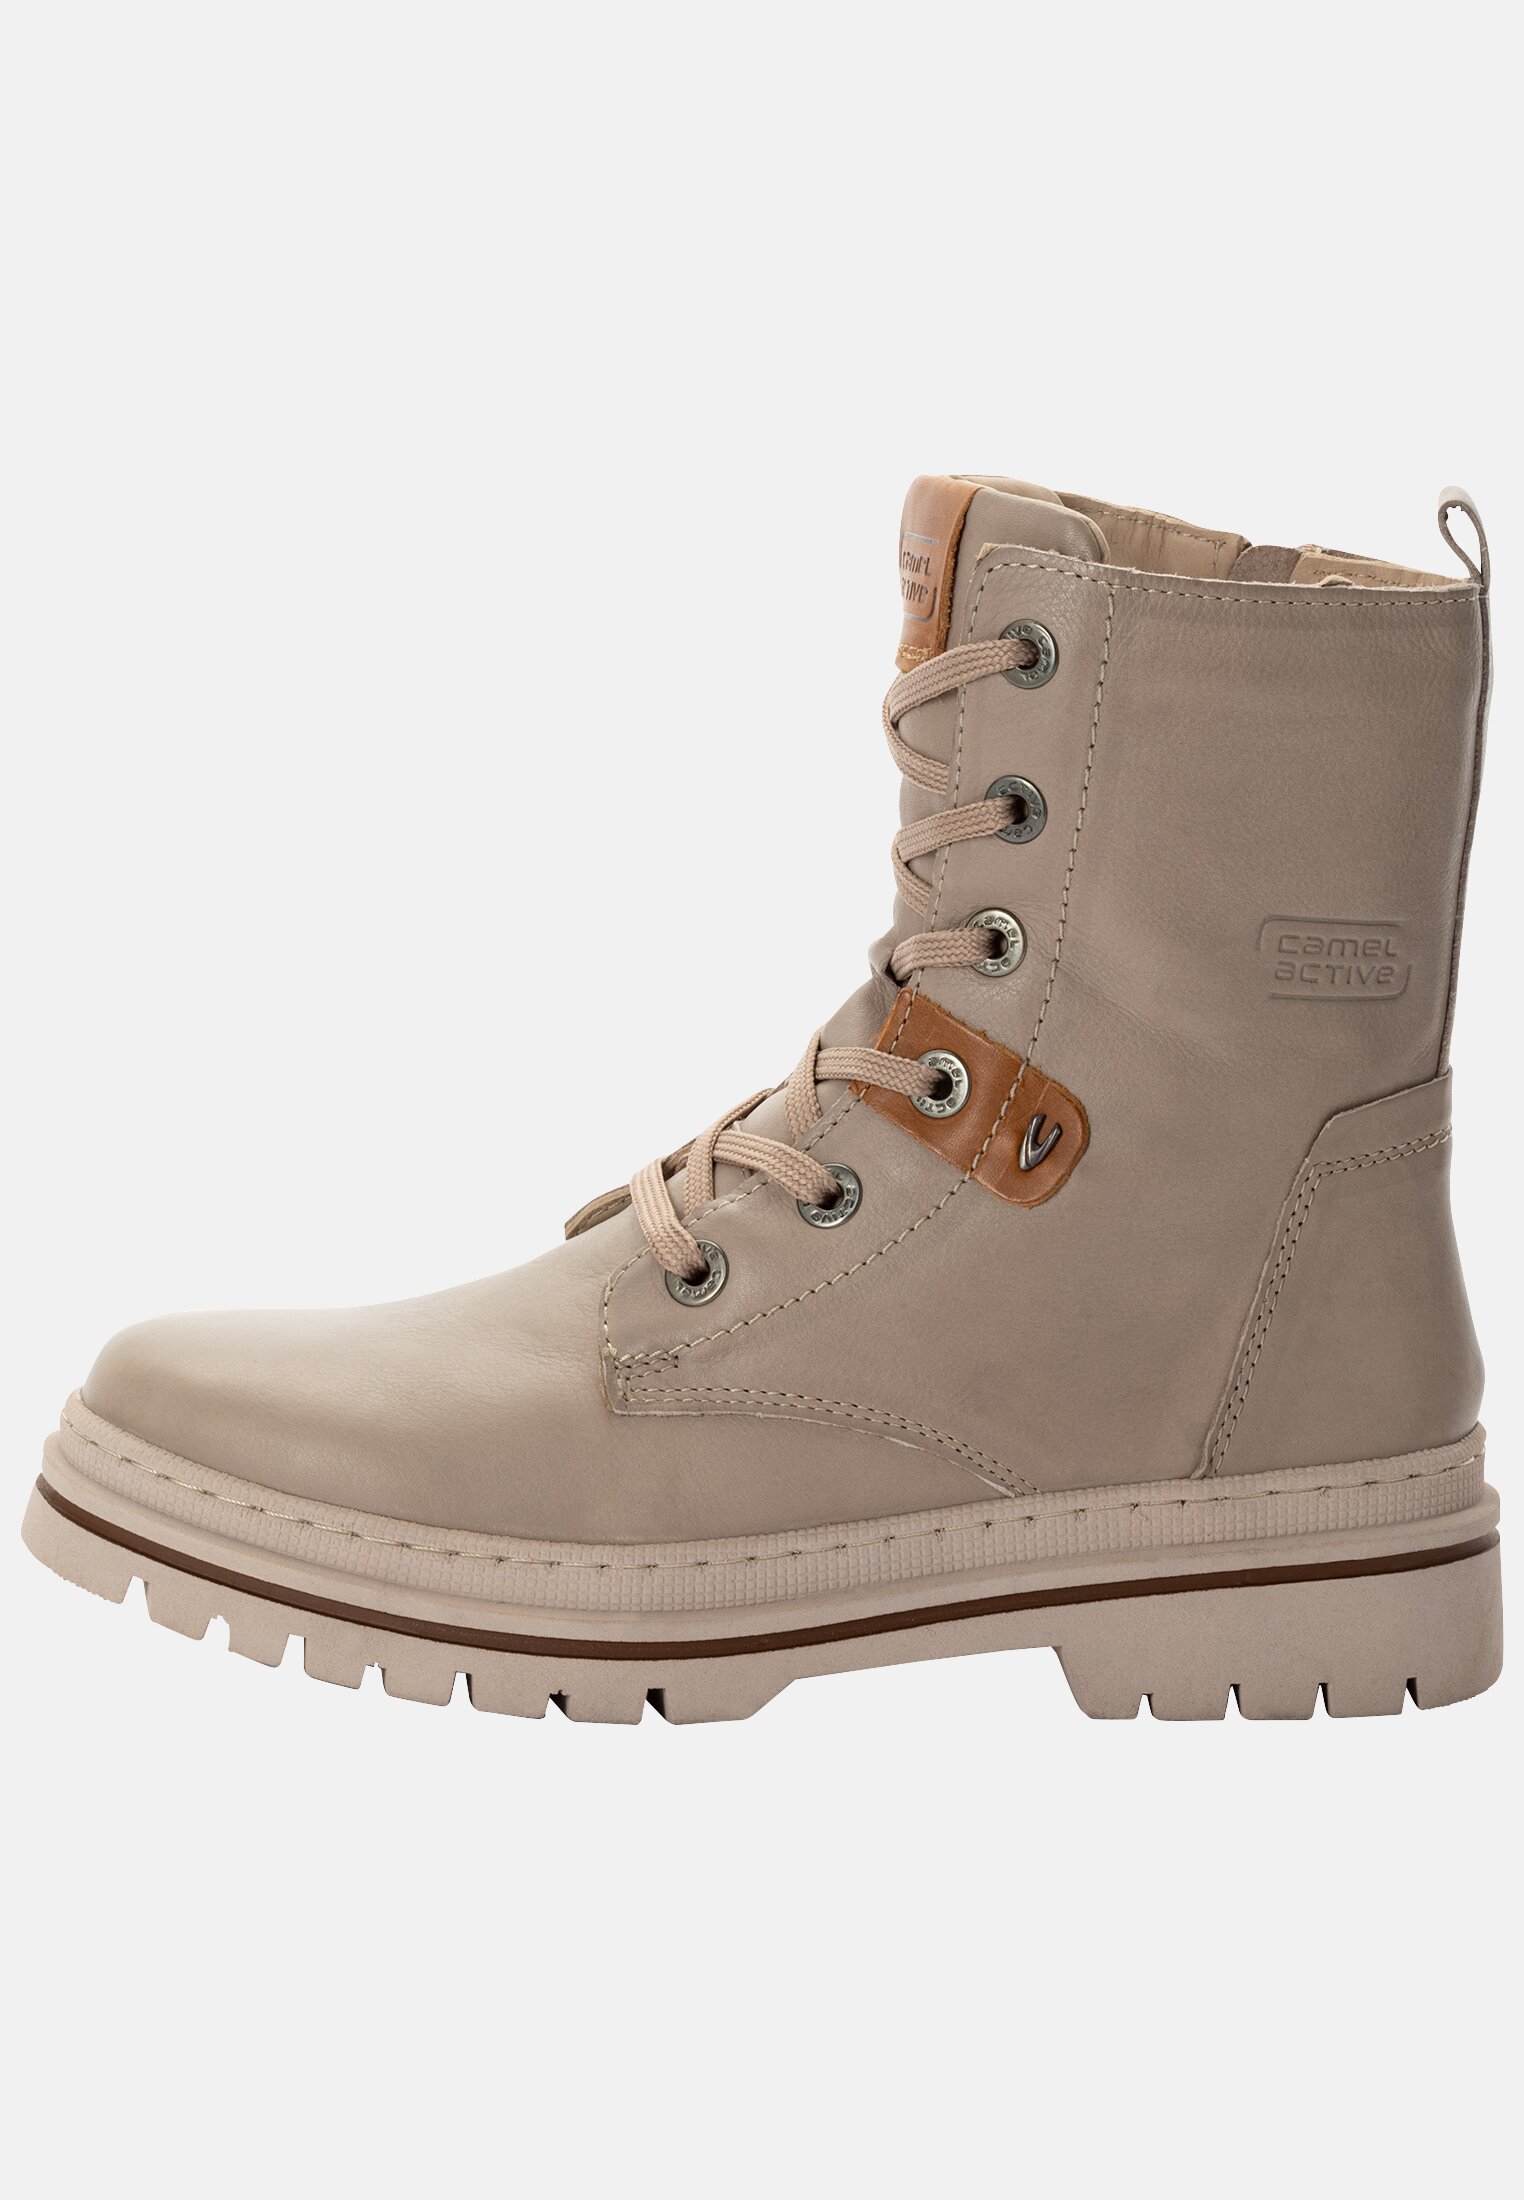 Camel Active Lace-up boot made from cowhide nubuck leather